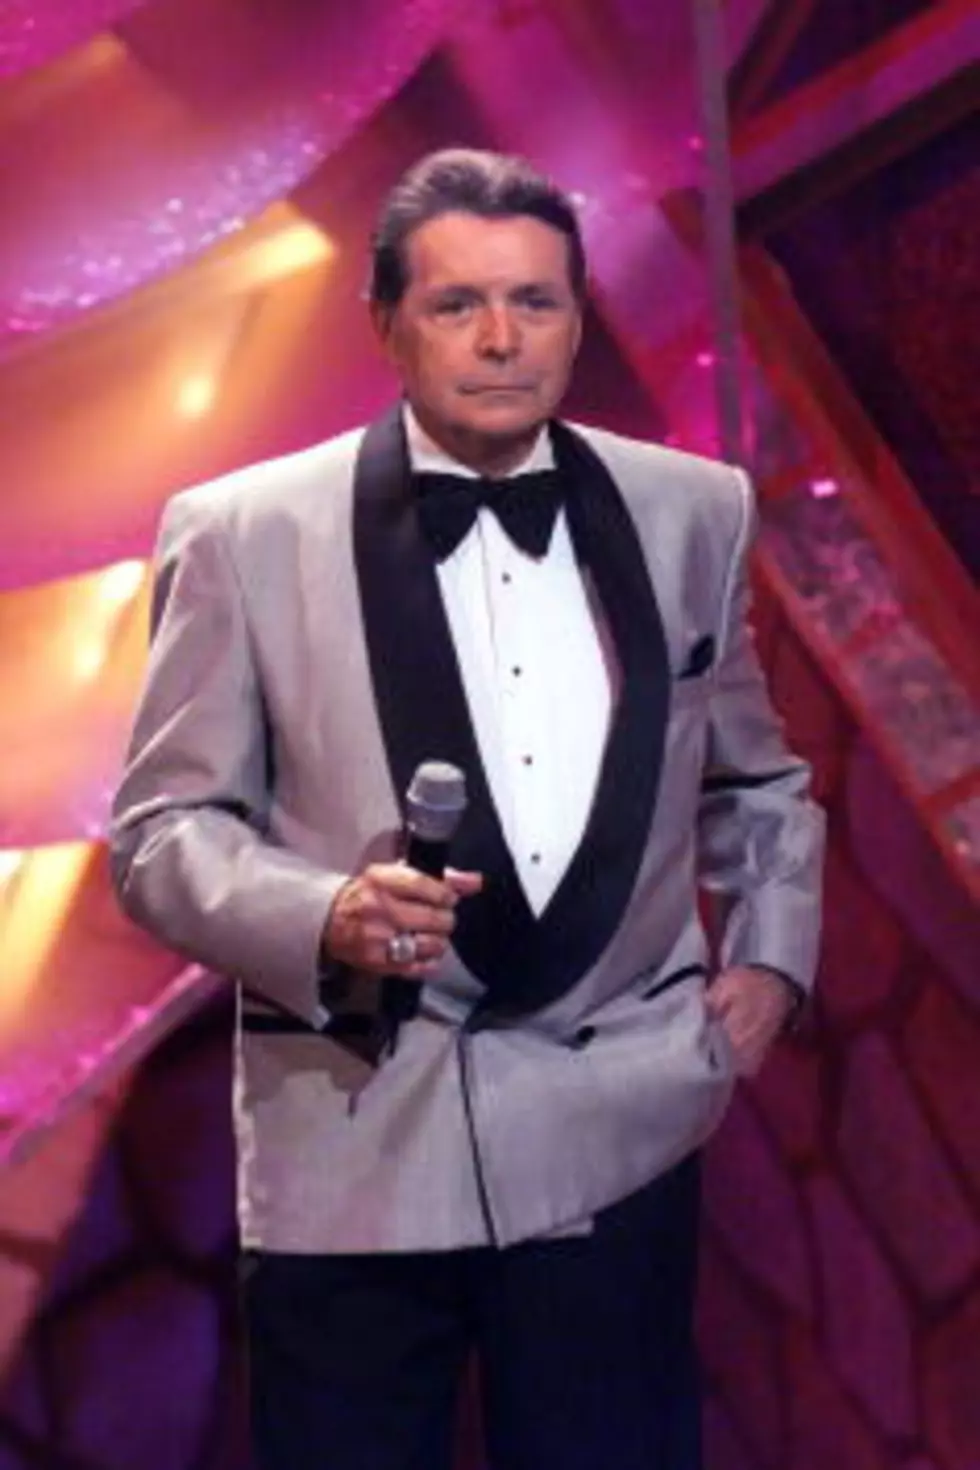 Mickey Gilley, Moe Bandy to be Inducted to Texas Country Music Hall of Fame